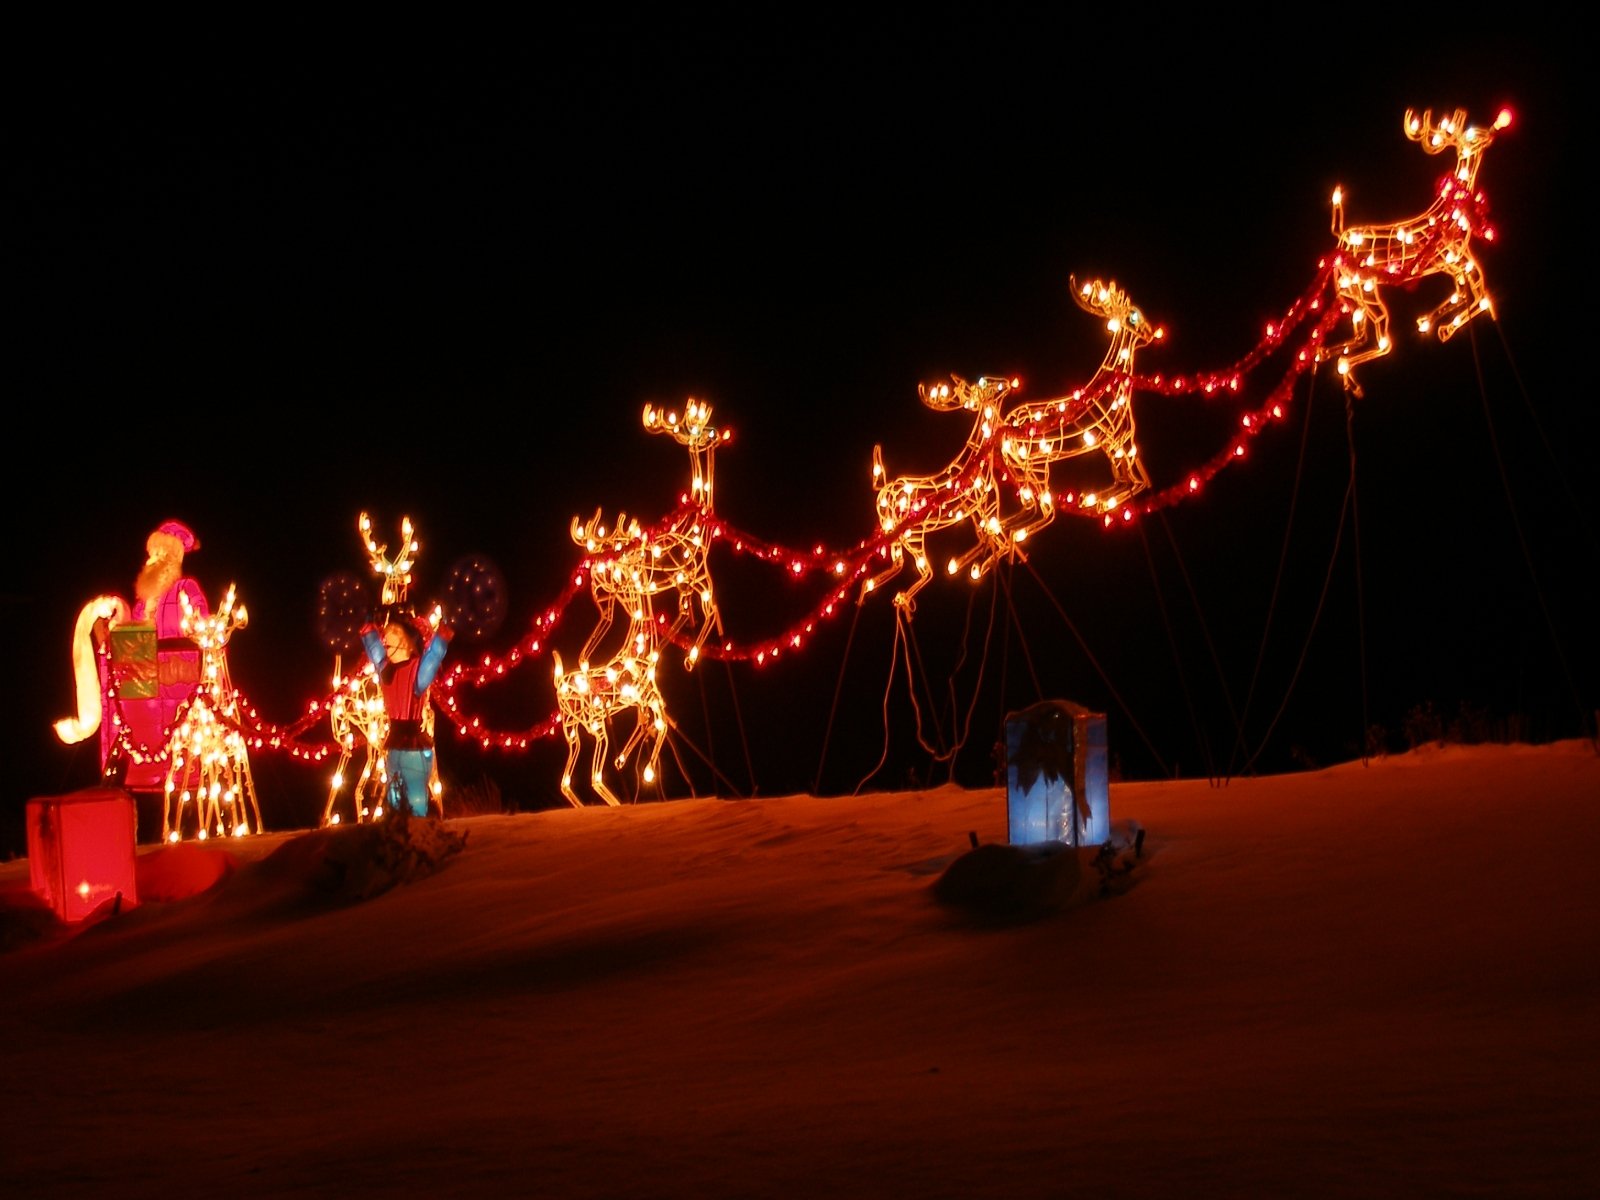 people in costume standing around with lights in the dark